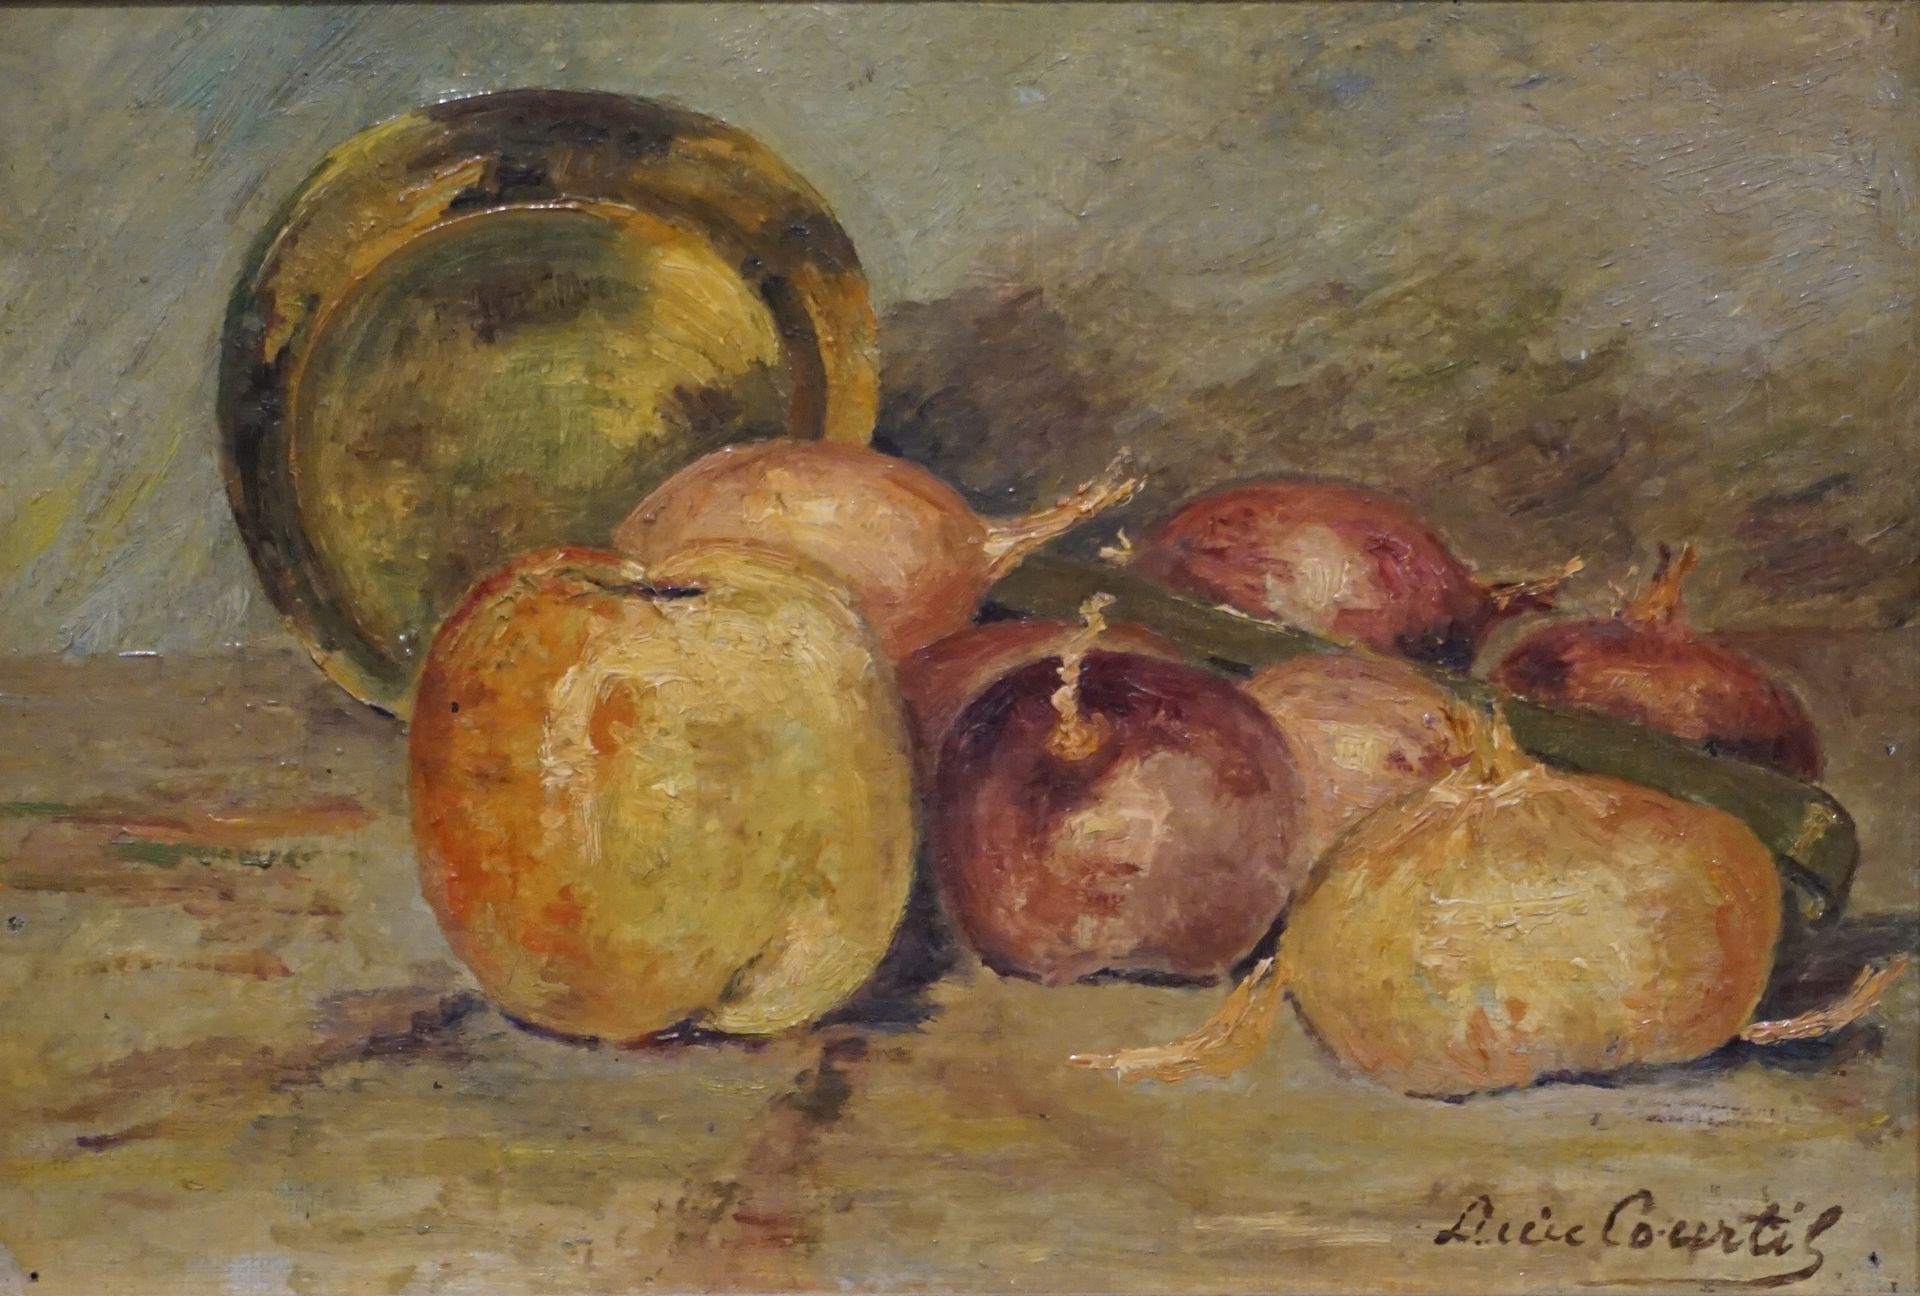 Lucie COURTIL "Still life with apple and onions", oil on canvas, sbd. 24x35 cm